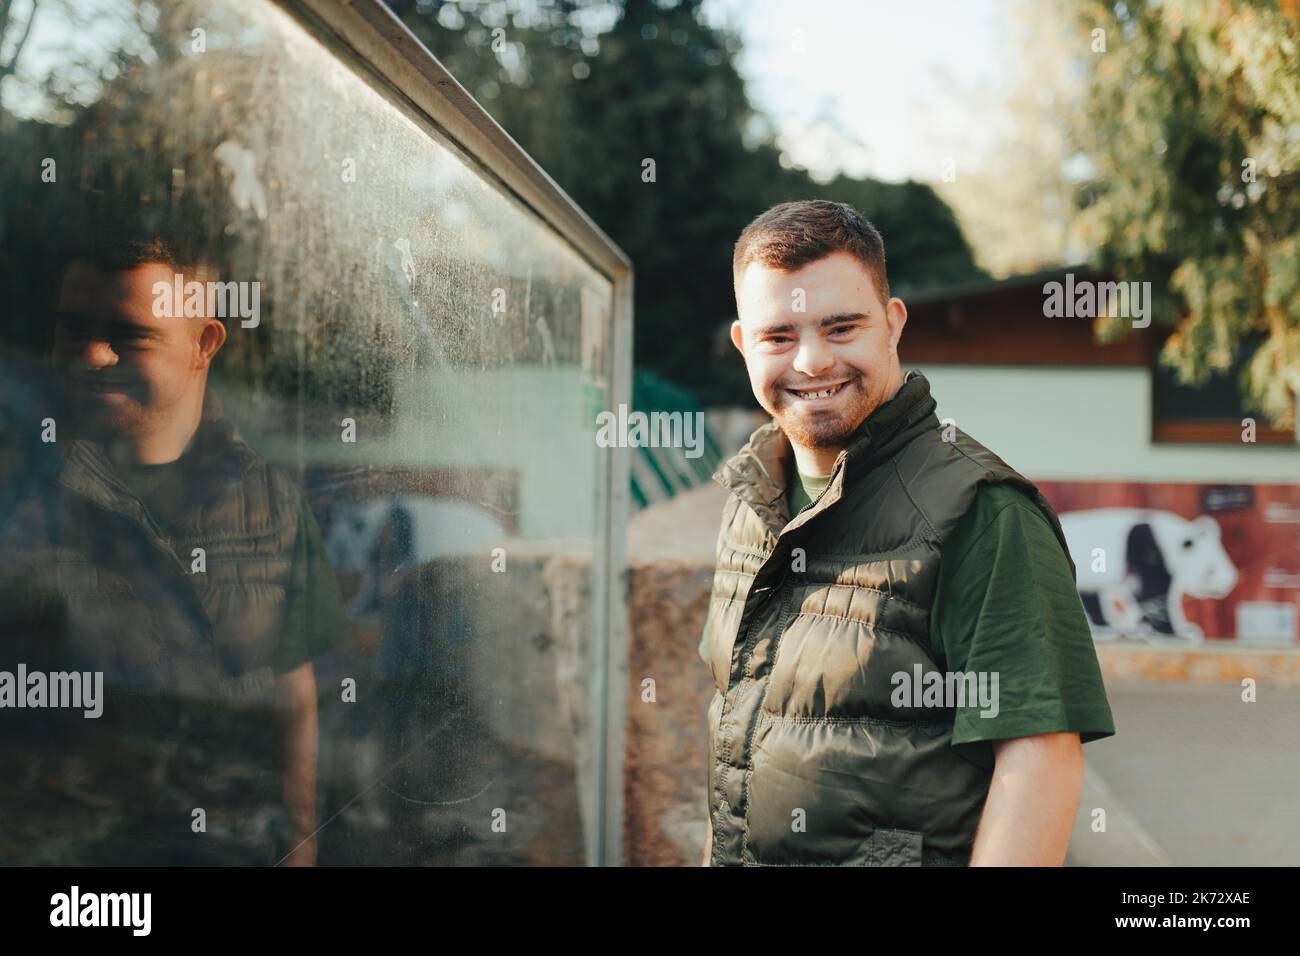 Portrait of caretaker with down syndrome in zoo. Concept of integration people with disabilities into society. Stock Photo